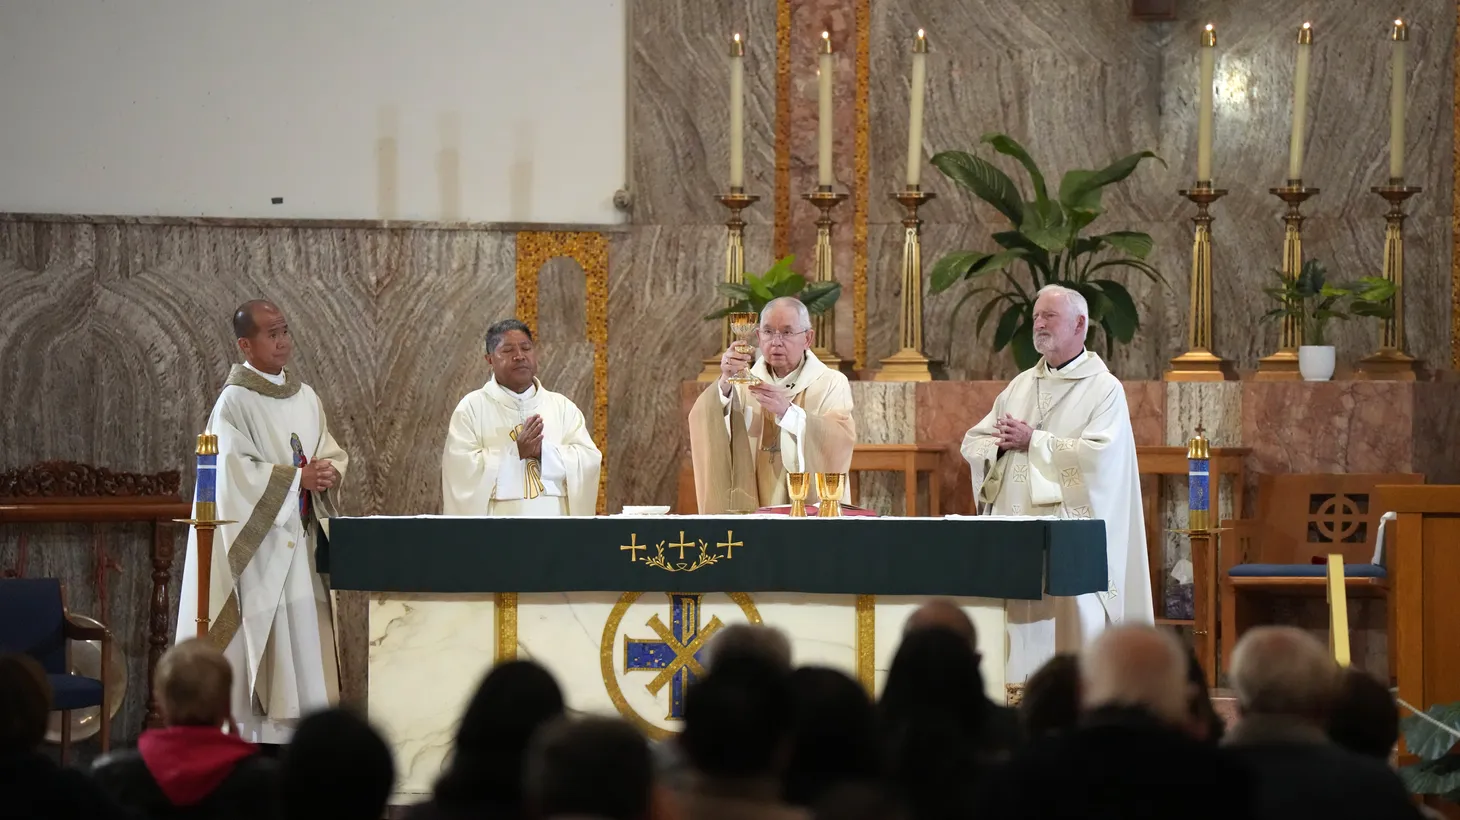 Auxiliary Bishop for the San Gabriel Region of the Archdiocese of Los Angeles David G. O'Connell (far right) participates in a mass for shooting victims at the St. Stephen Martyr Catholic Church on Jan. 27 2023, in Monterey Park, Calif.